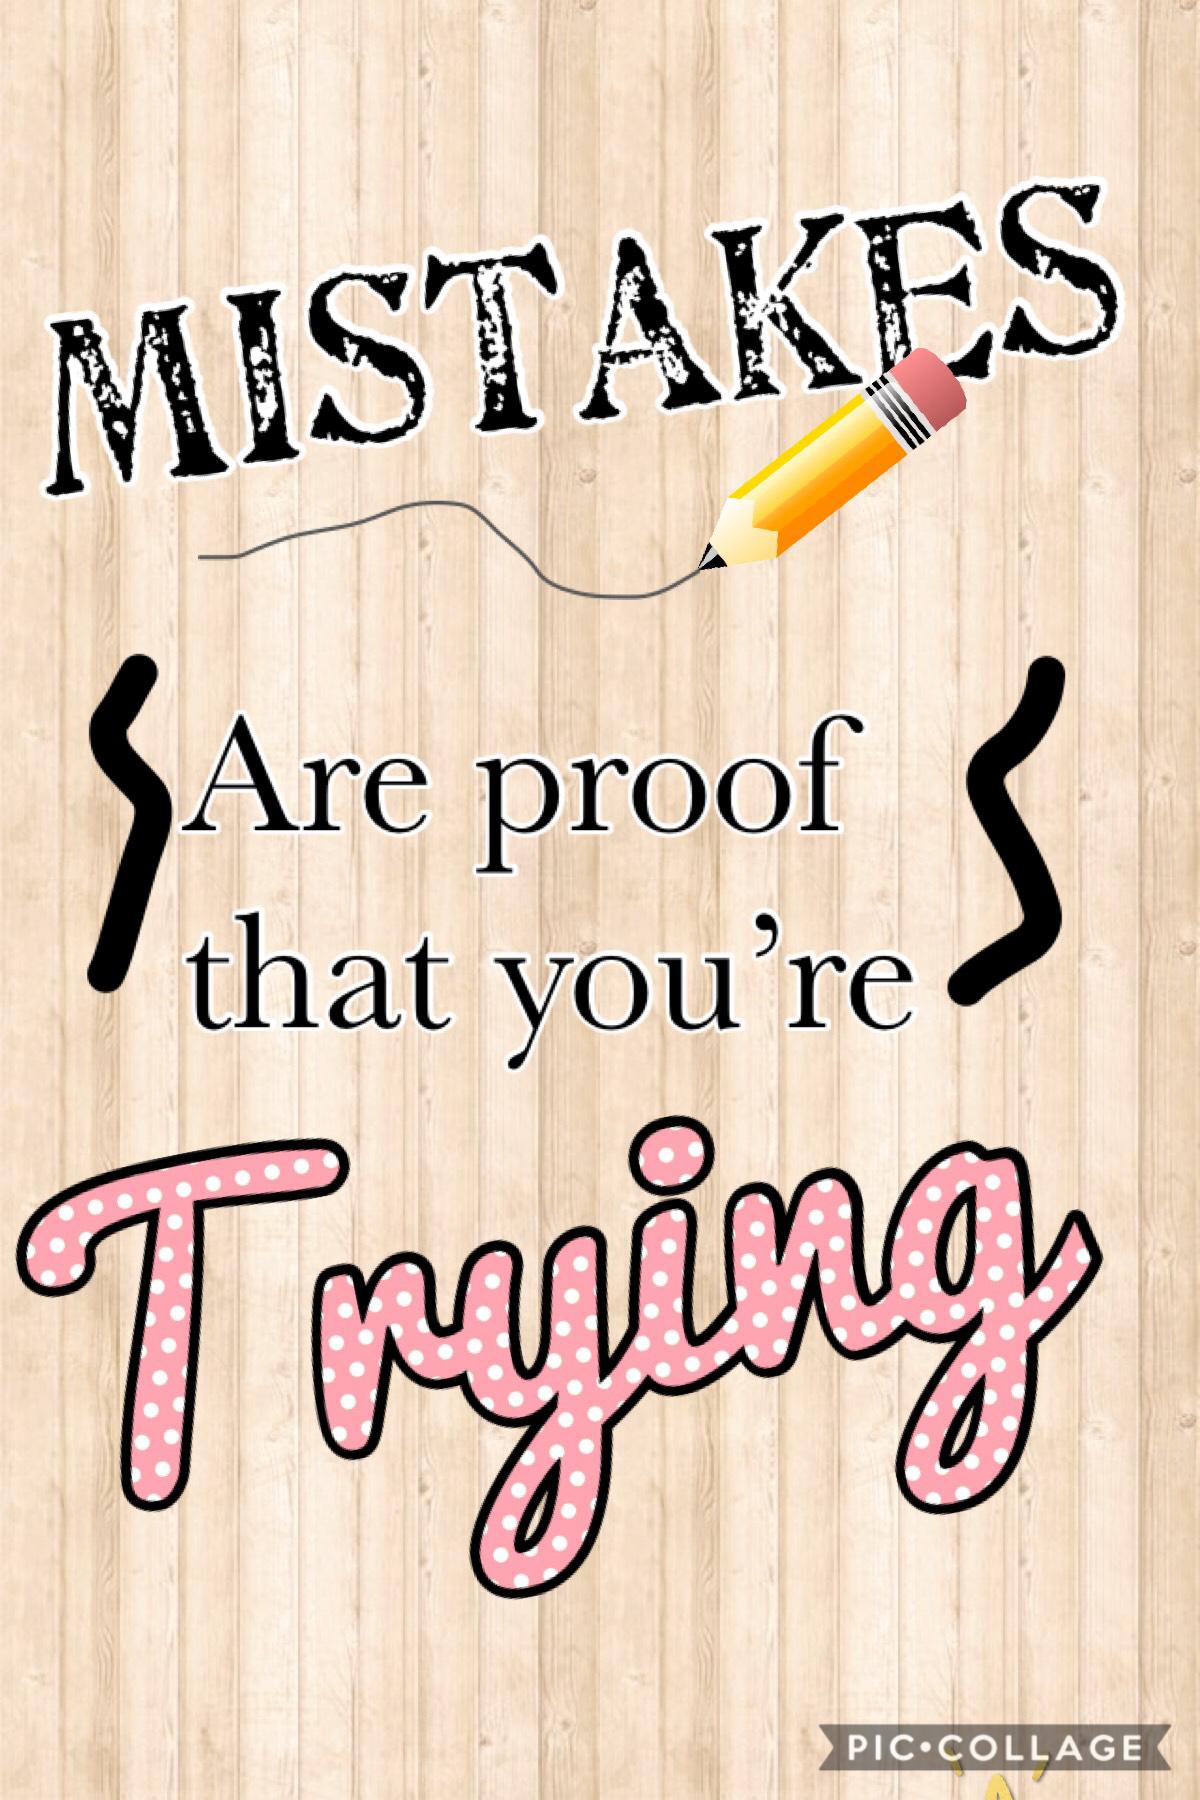 Don’t be afraid to make mistakes!